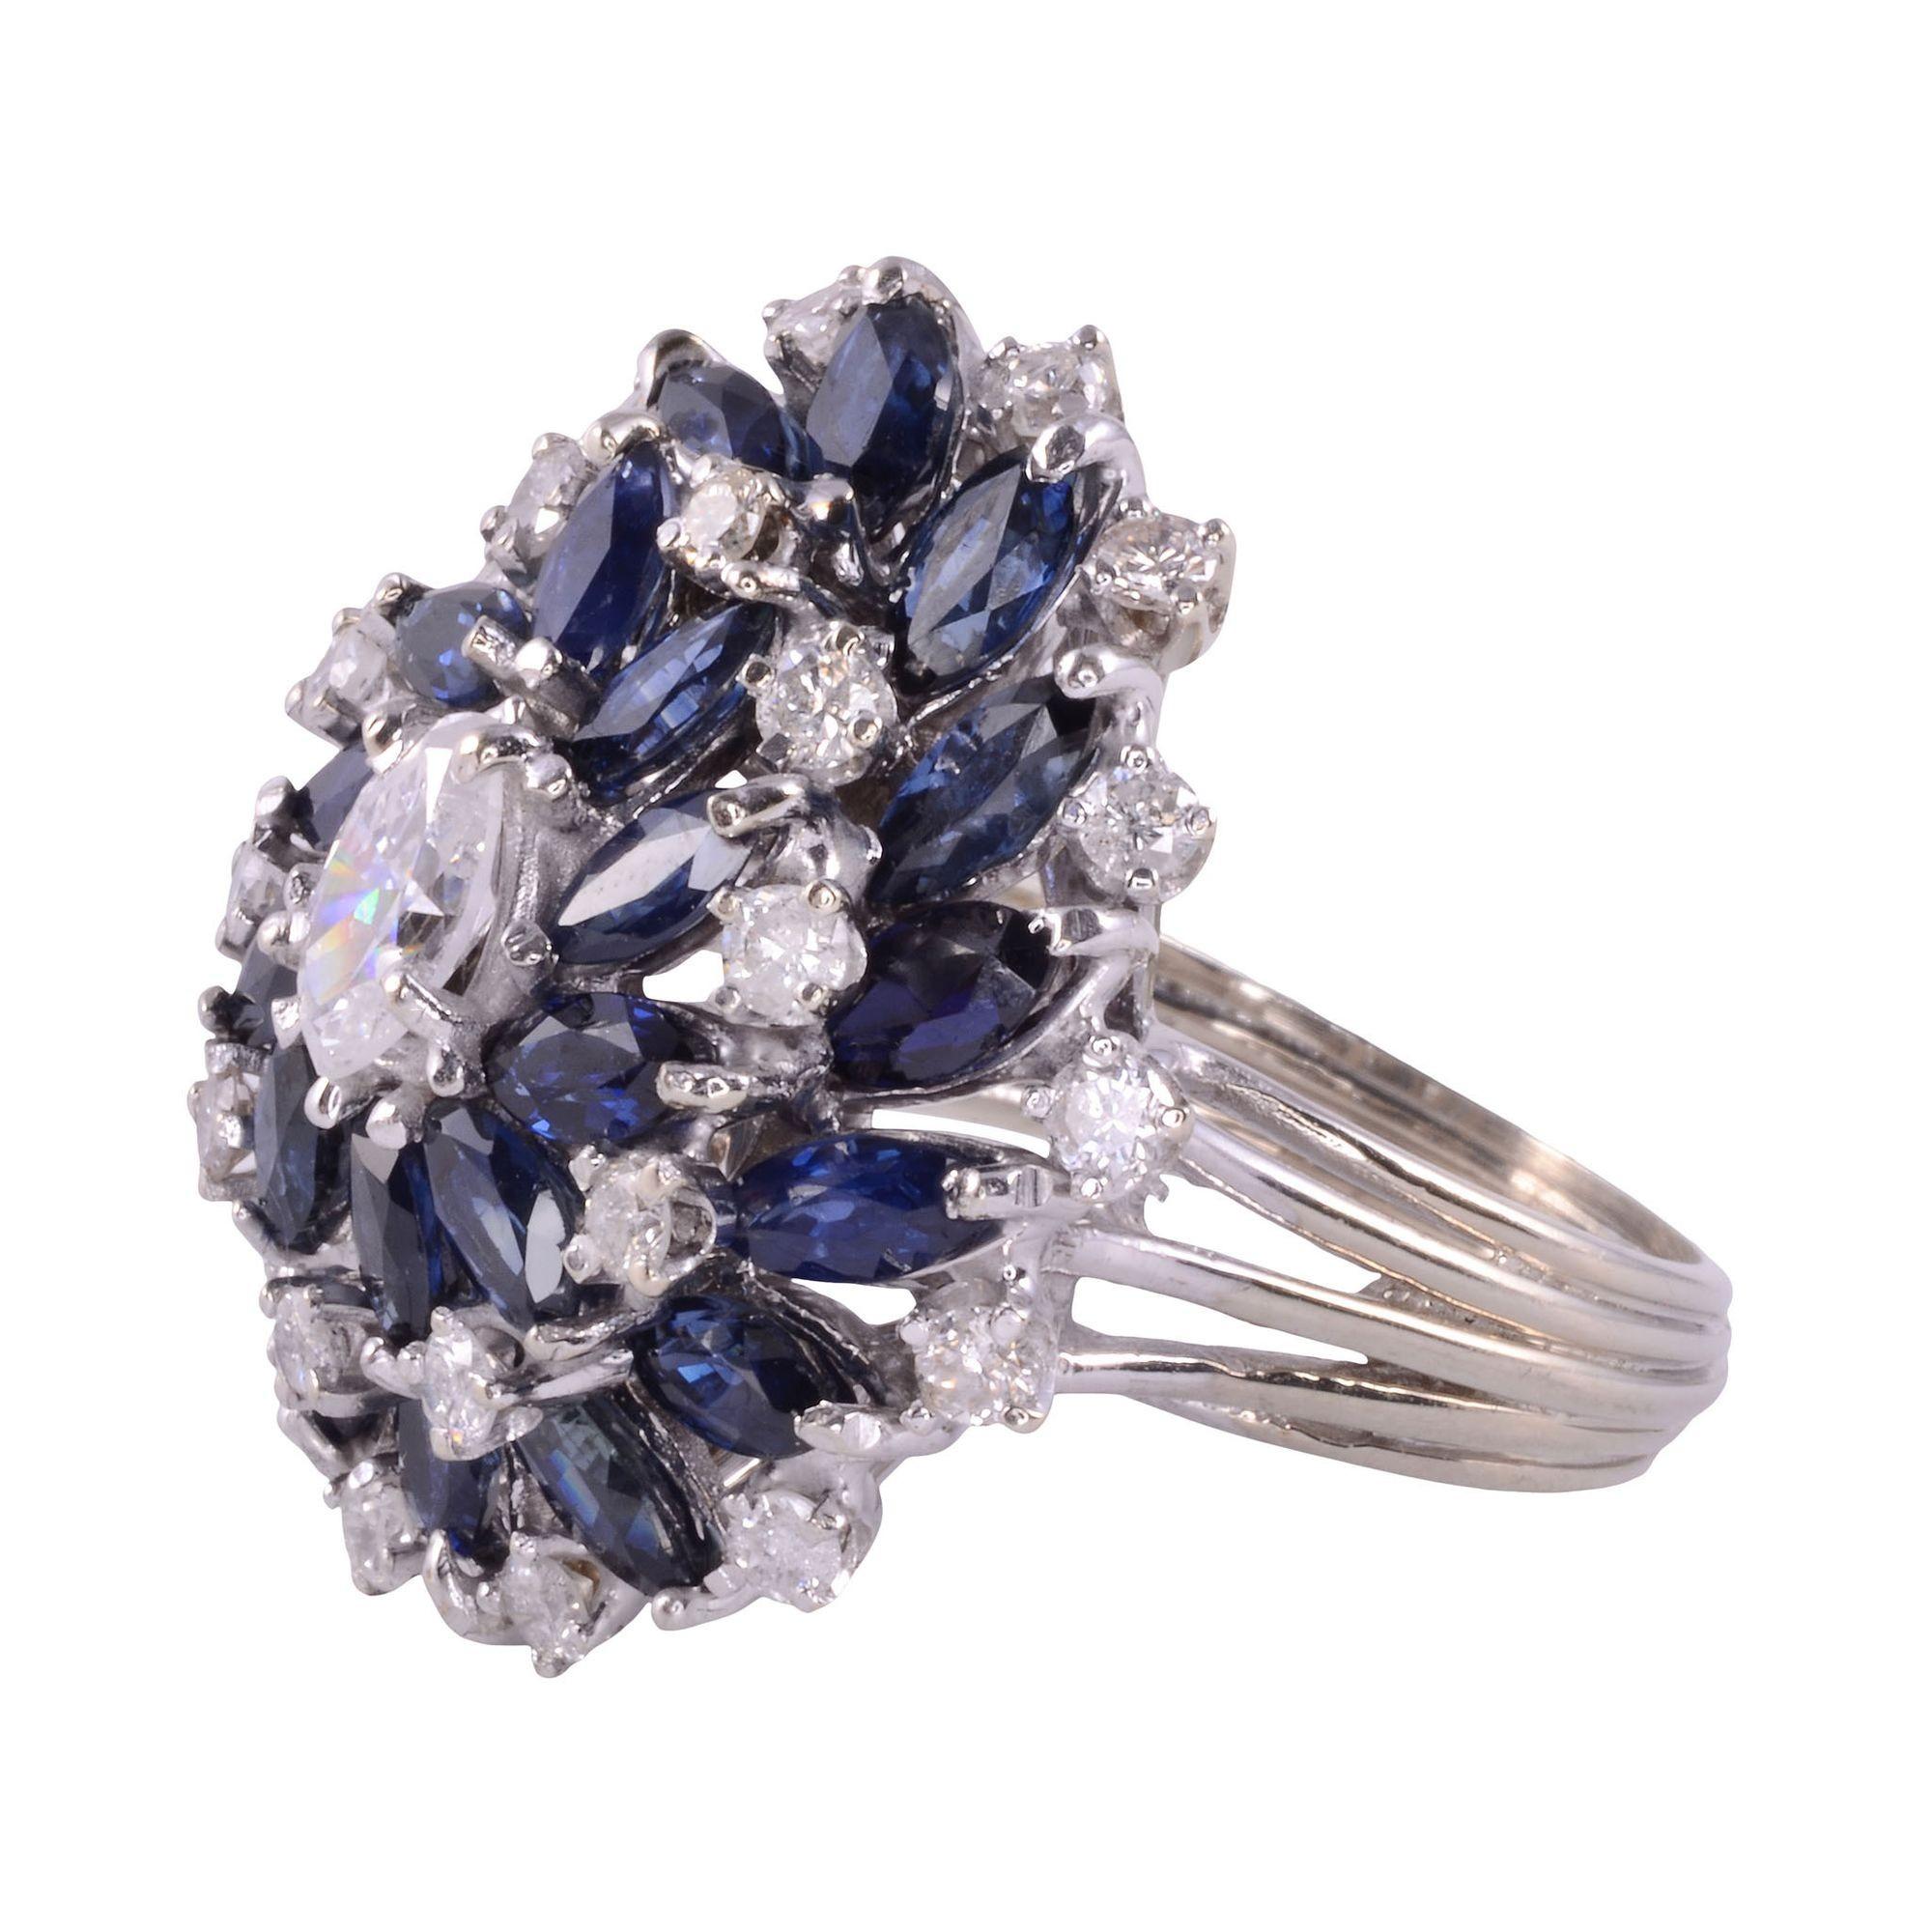 Estate marquise diamond & sapphire cocktail ring, circa 1980. This cocktail ring is crafted in 18 karat white gold and features diamonds and sapphires in wire basket style setting. The center .50 carat marquise diamond has I1 clarity and F color.